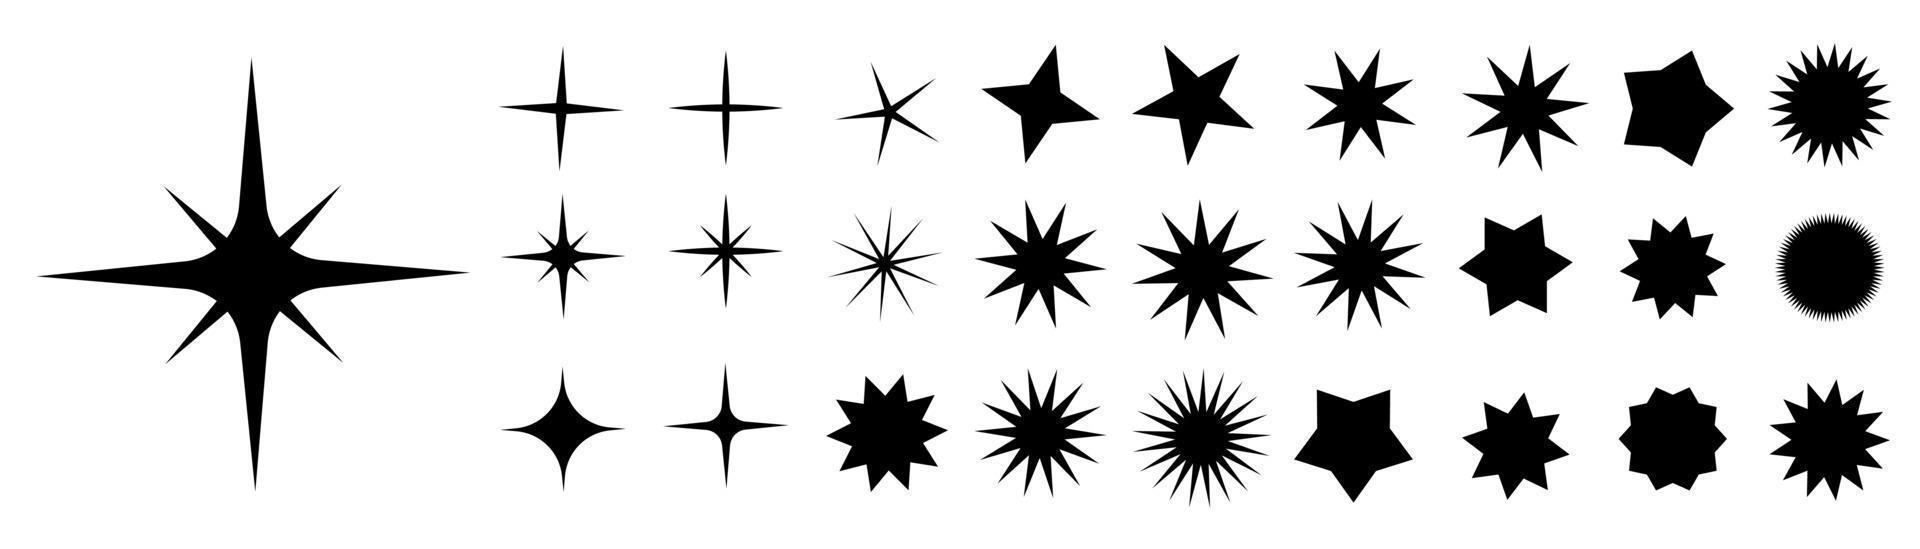 Star icon. Collection of illustrations of twinkling stars. Sparks, shining explosion in the sky. vector